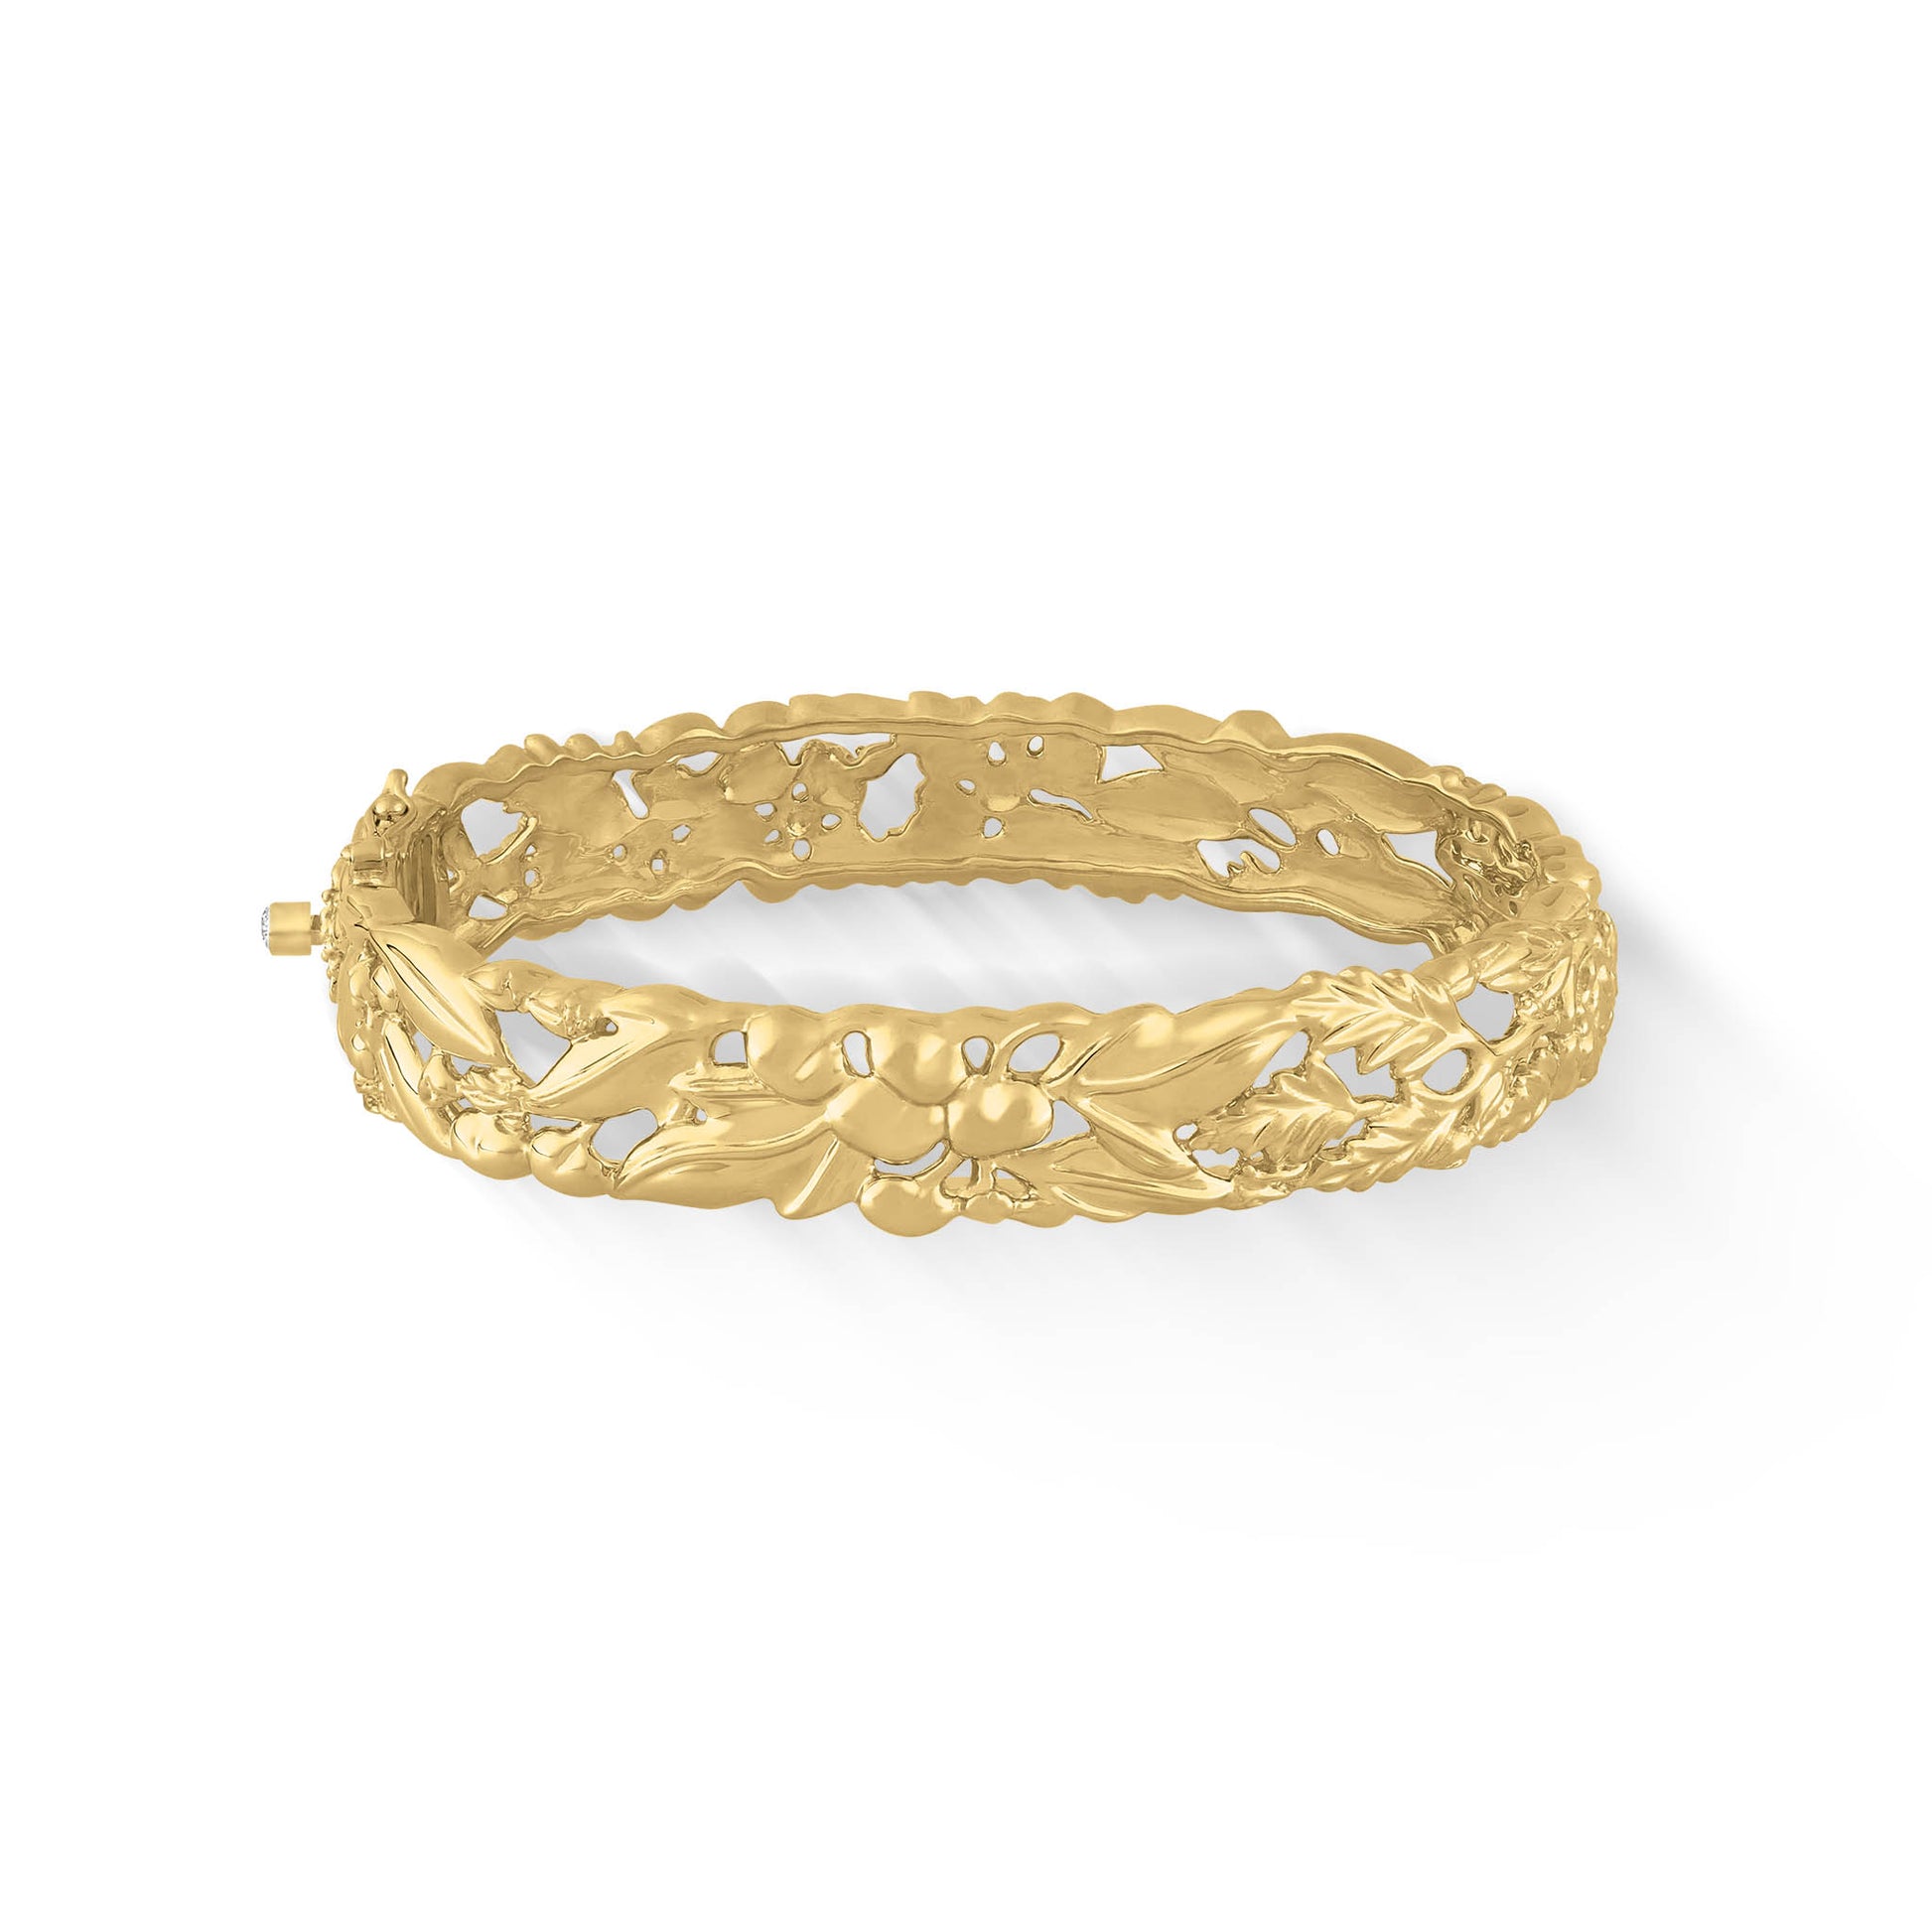 41516 - 14K Yellow Gold - Flowers of the Islands Hinged Bangle